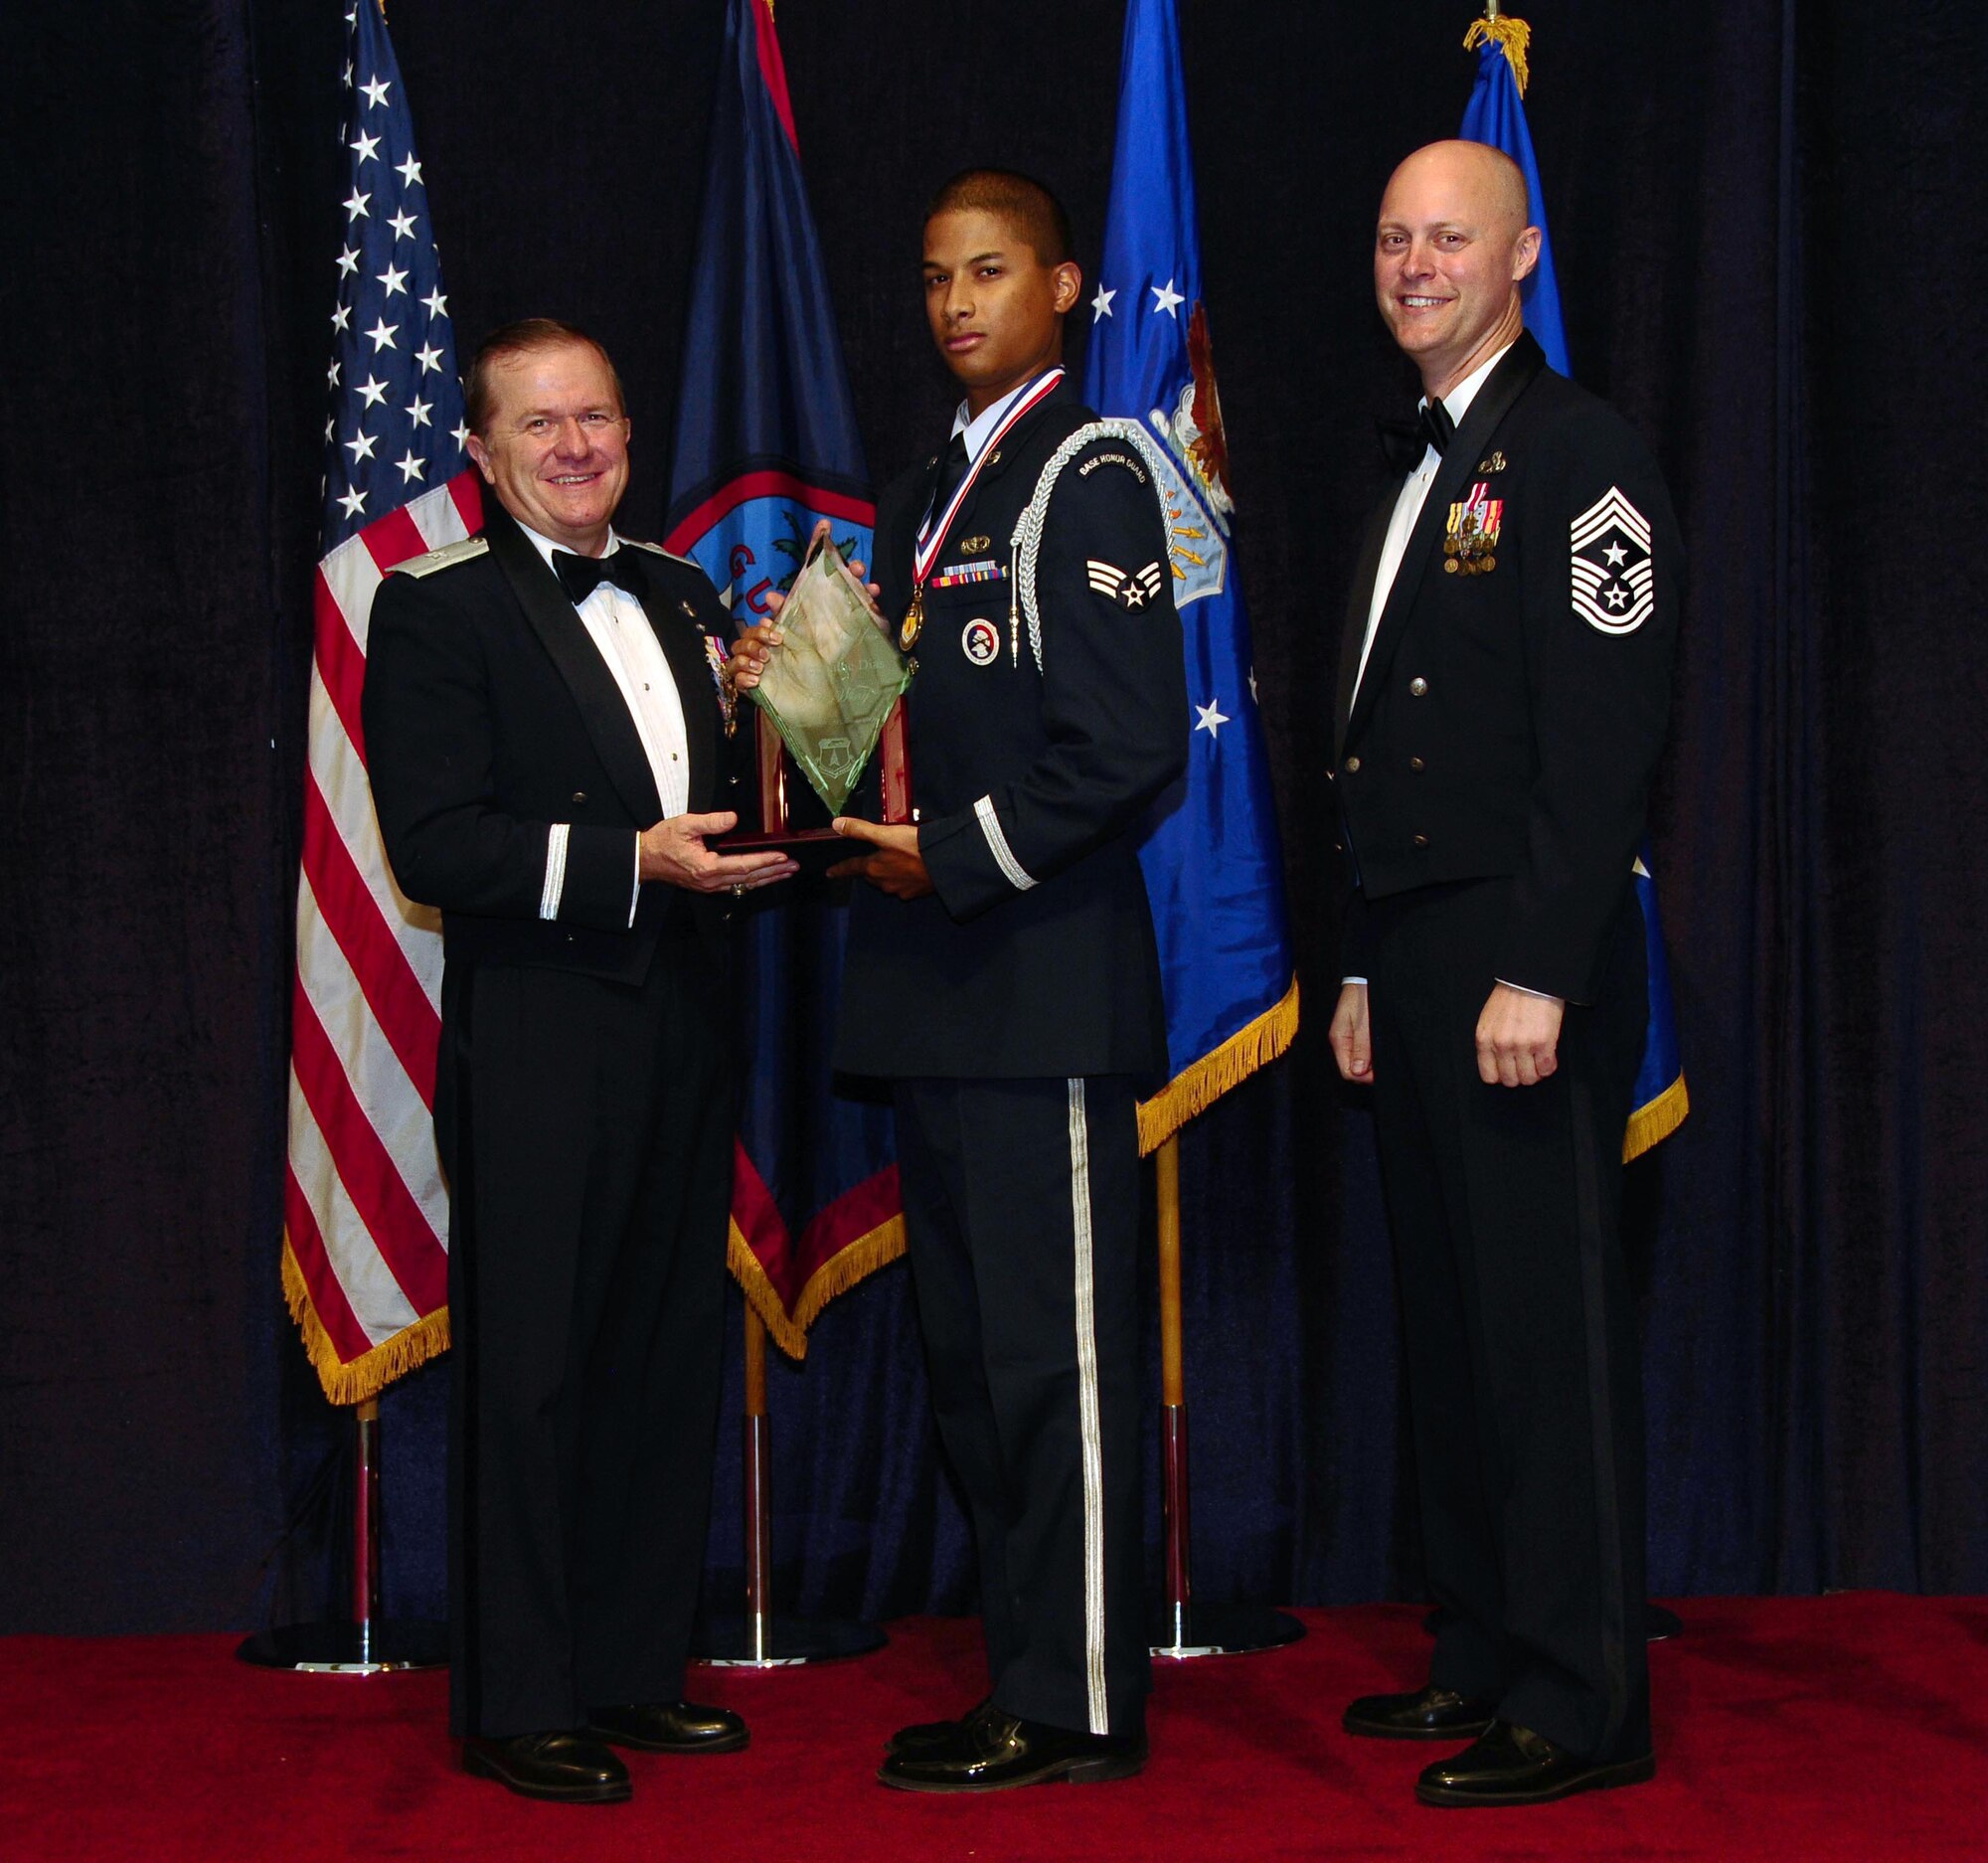 ANDERSEN AIR FORCE BASE, Guam - Honor Guard of the Year winner Senior Airman Jermaine Dias, 36th Mission Support Group, is congratulated by Brig. Gen. Phil Ruhlman, Commander, 36th Wing, and Command Chief Master Sgt. Allen Mullinex during the Feb. 19 Annual Award ceremony. The Honor Guard of the Year was one of the many awards given out that night ( U.S. Air Force photo by Airman 1st Class Jeffrey Schultze)